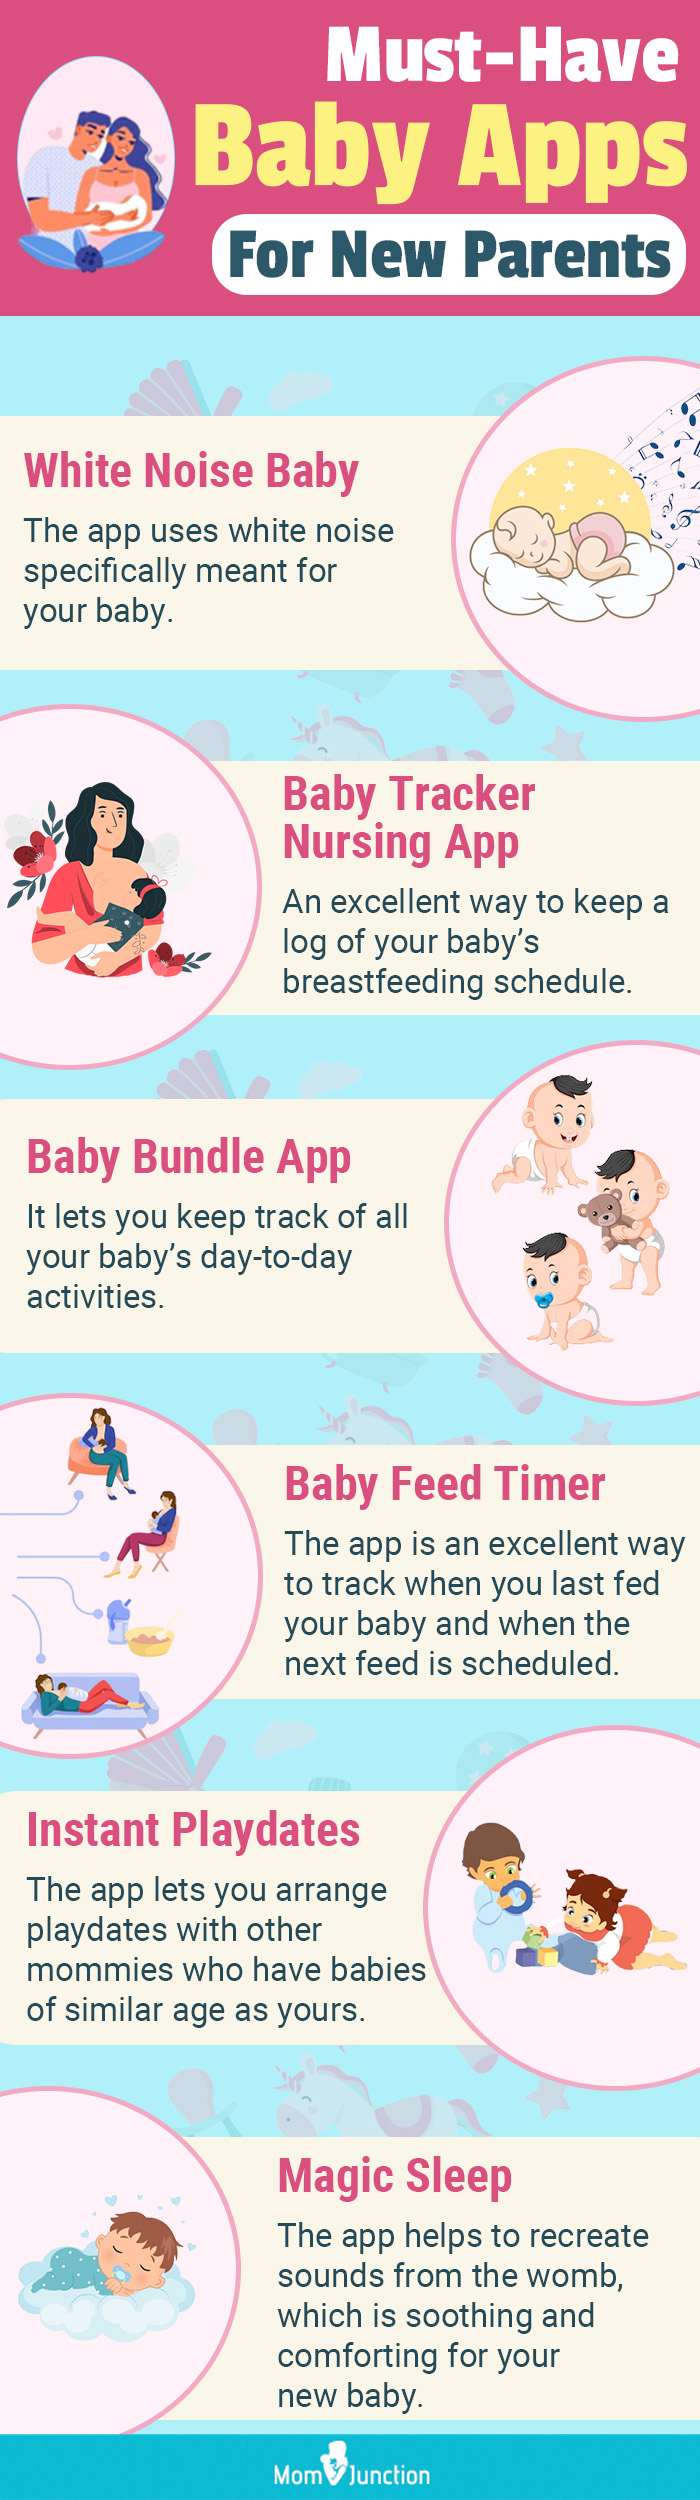 must have baby apps for new parents (infographic)